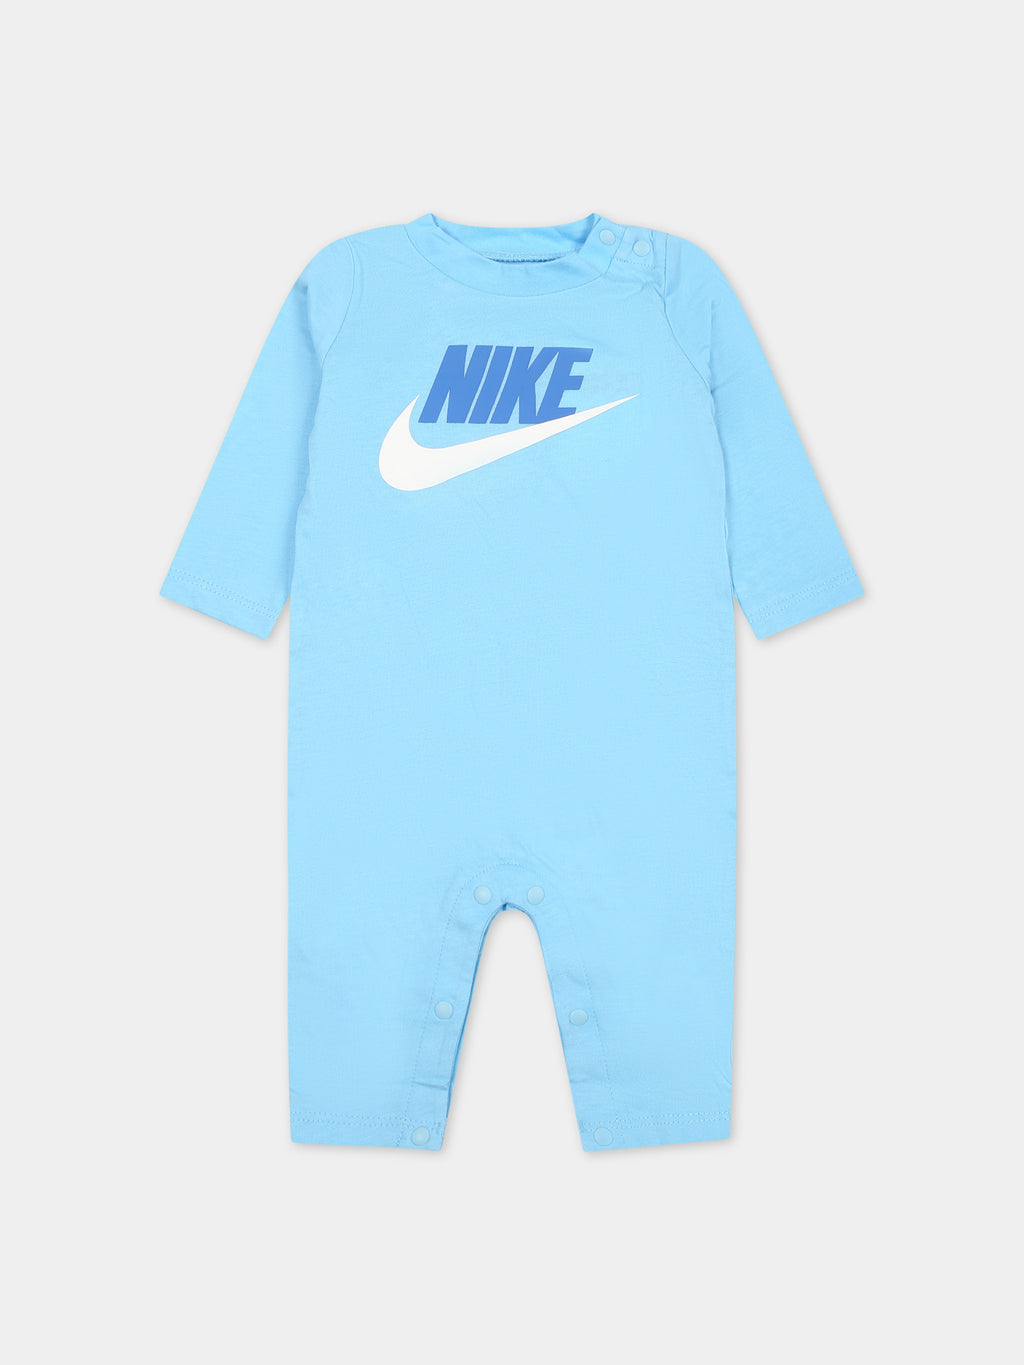 Light blue babygrow for baby boy with swoosh